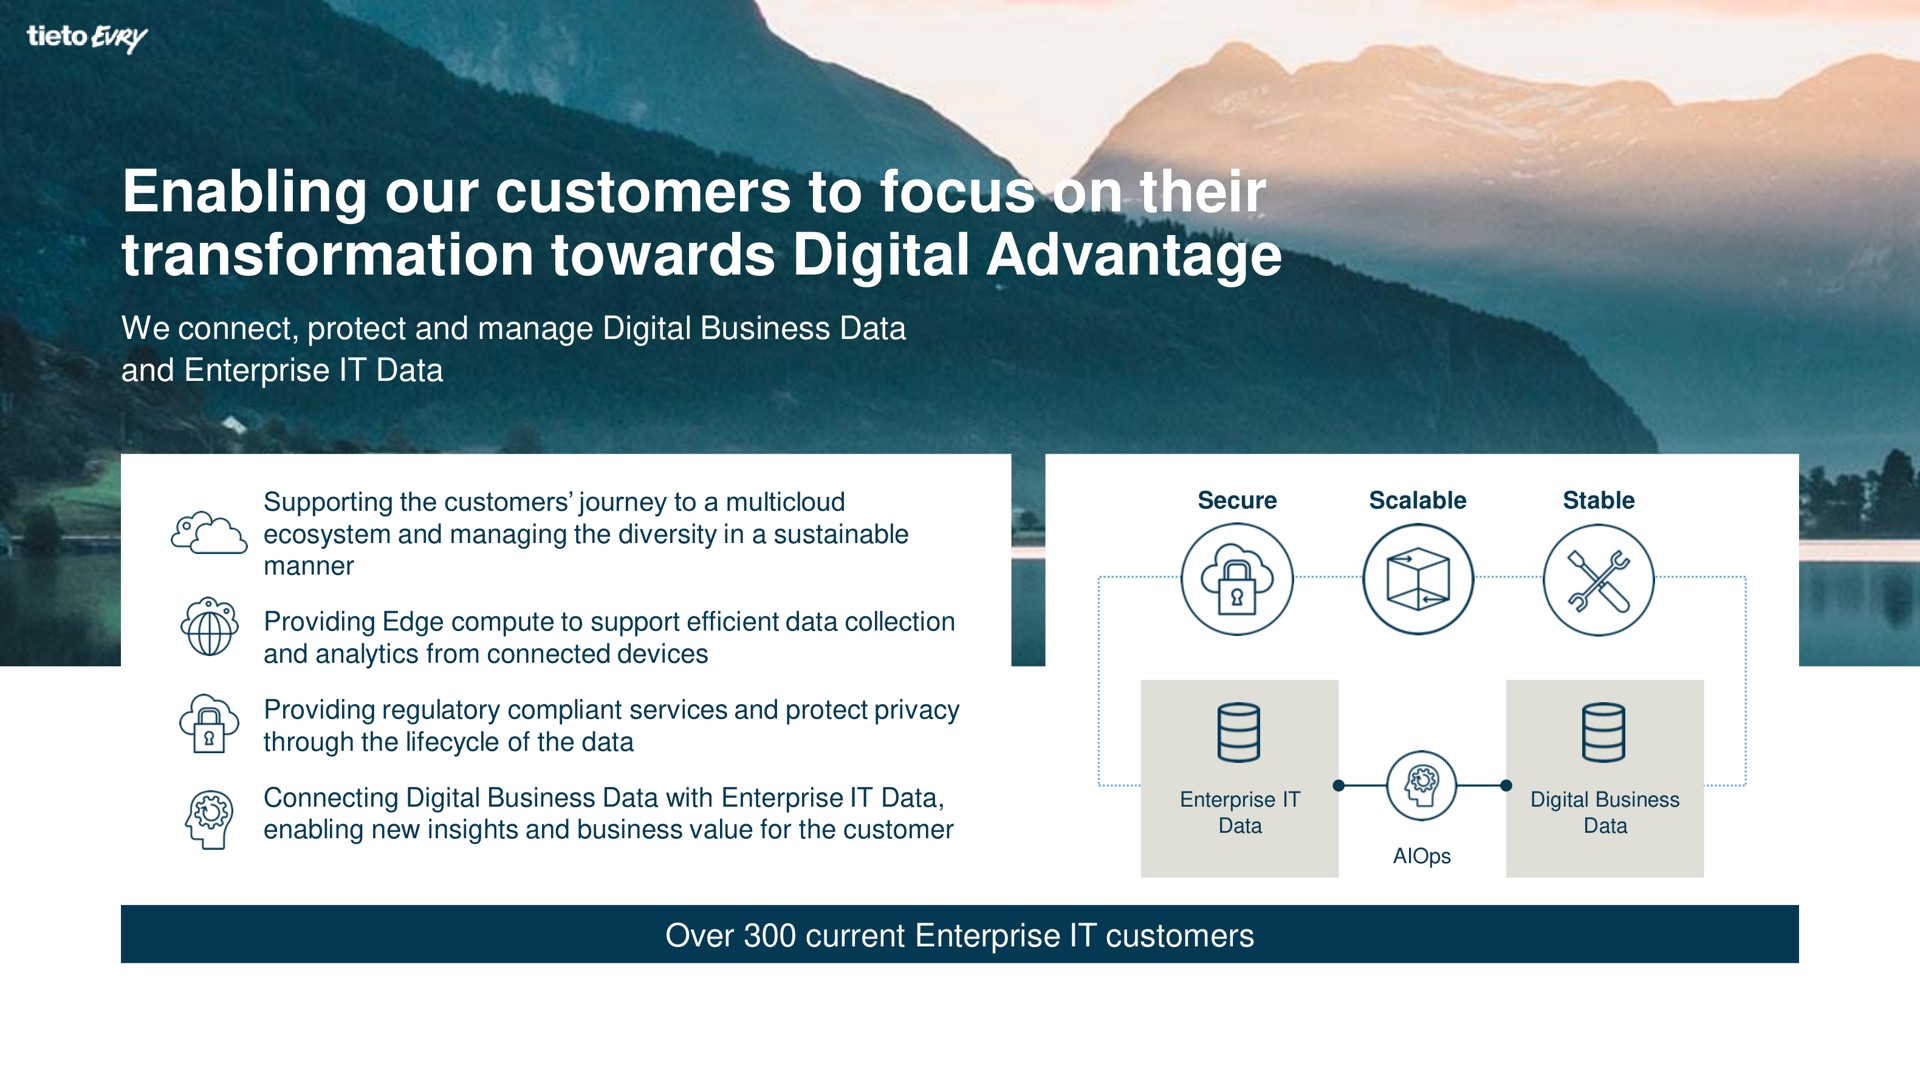 enabling our customers to focus on their transformation towards digital advantage | Tietoevry